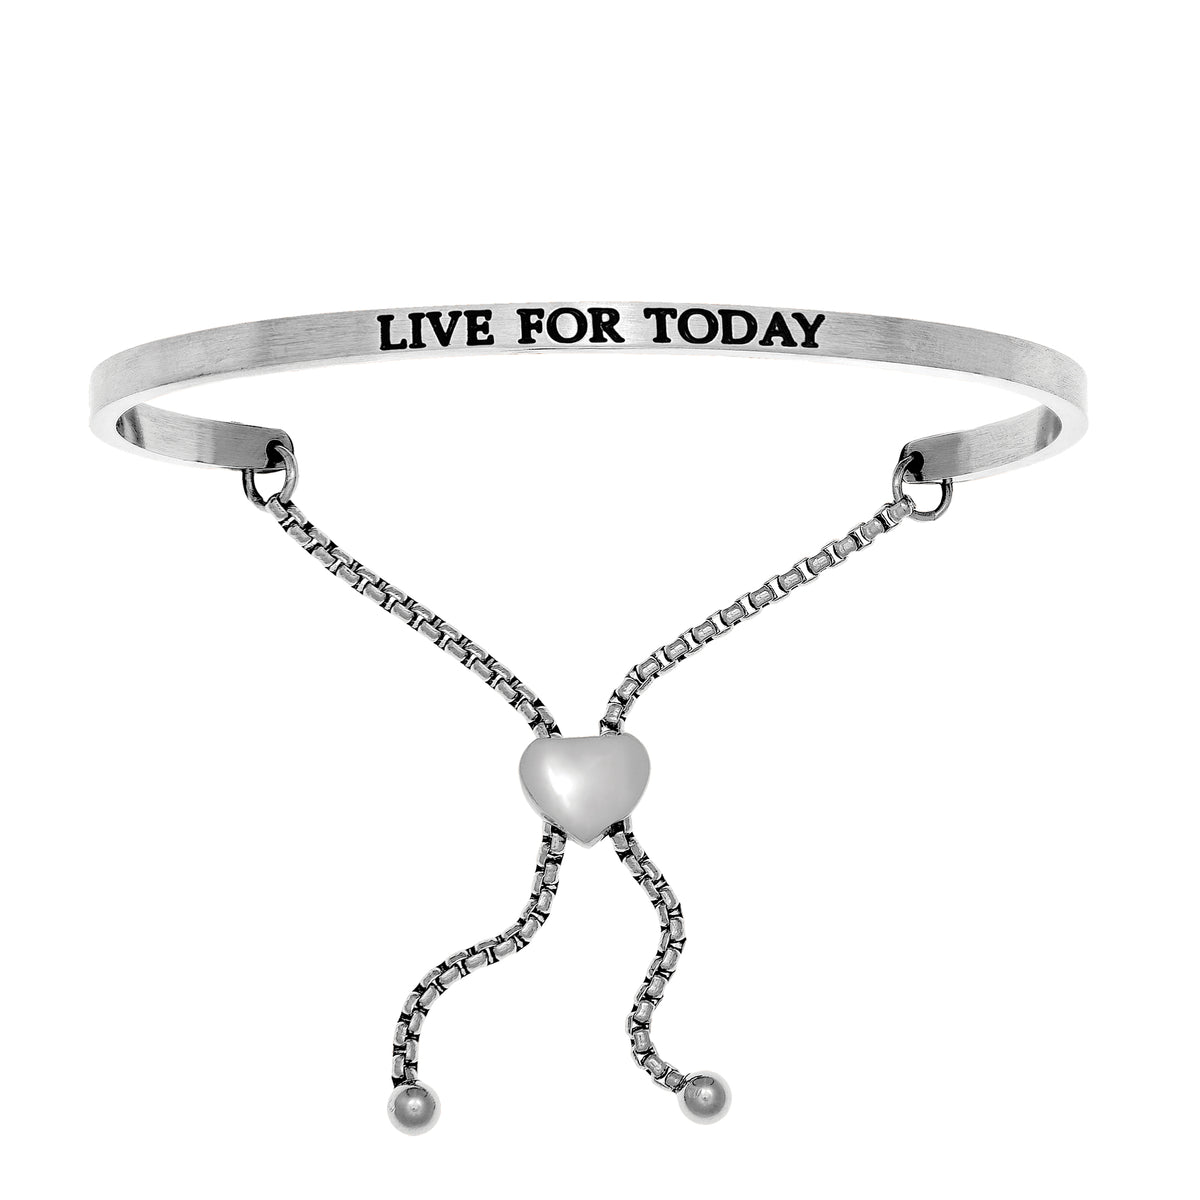 Intuitions Stainless Steel LIVE FOR TODAY Diamond Accent Adjustable Bracelet fine designer jewelry for men and women